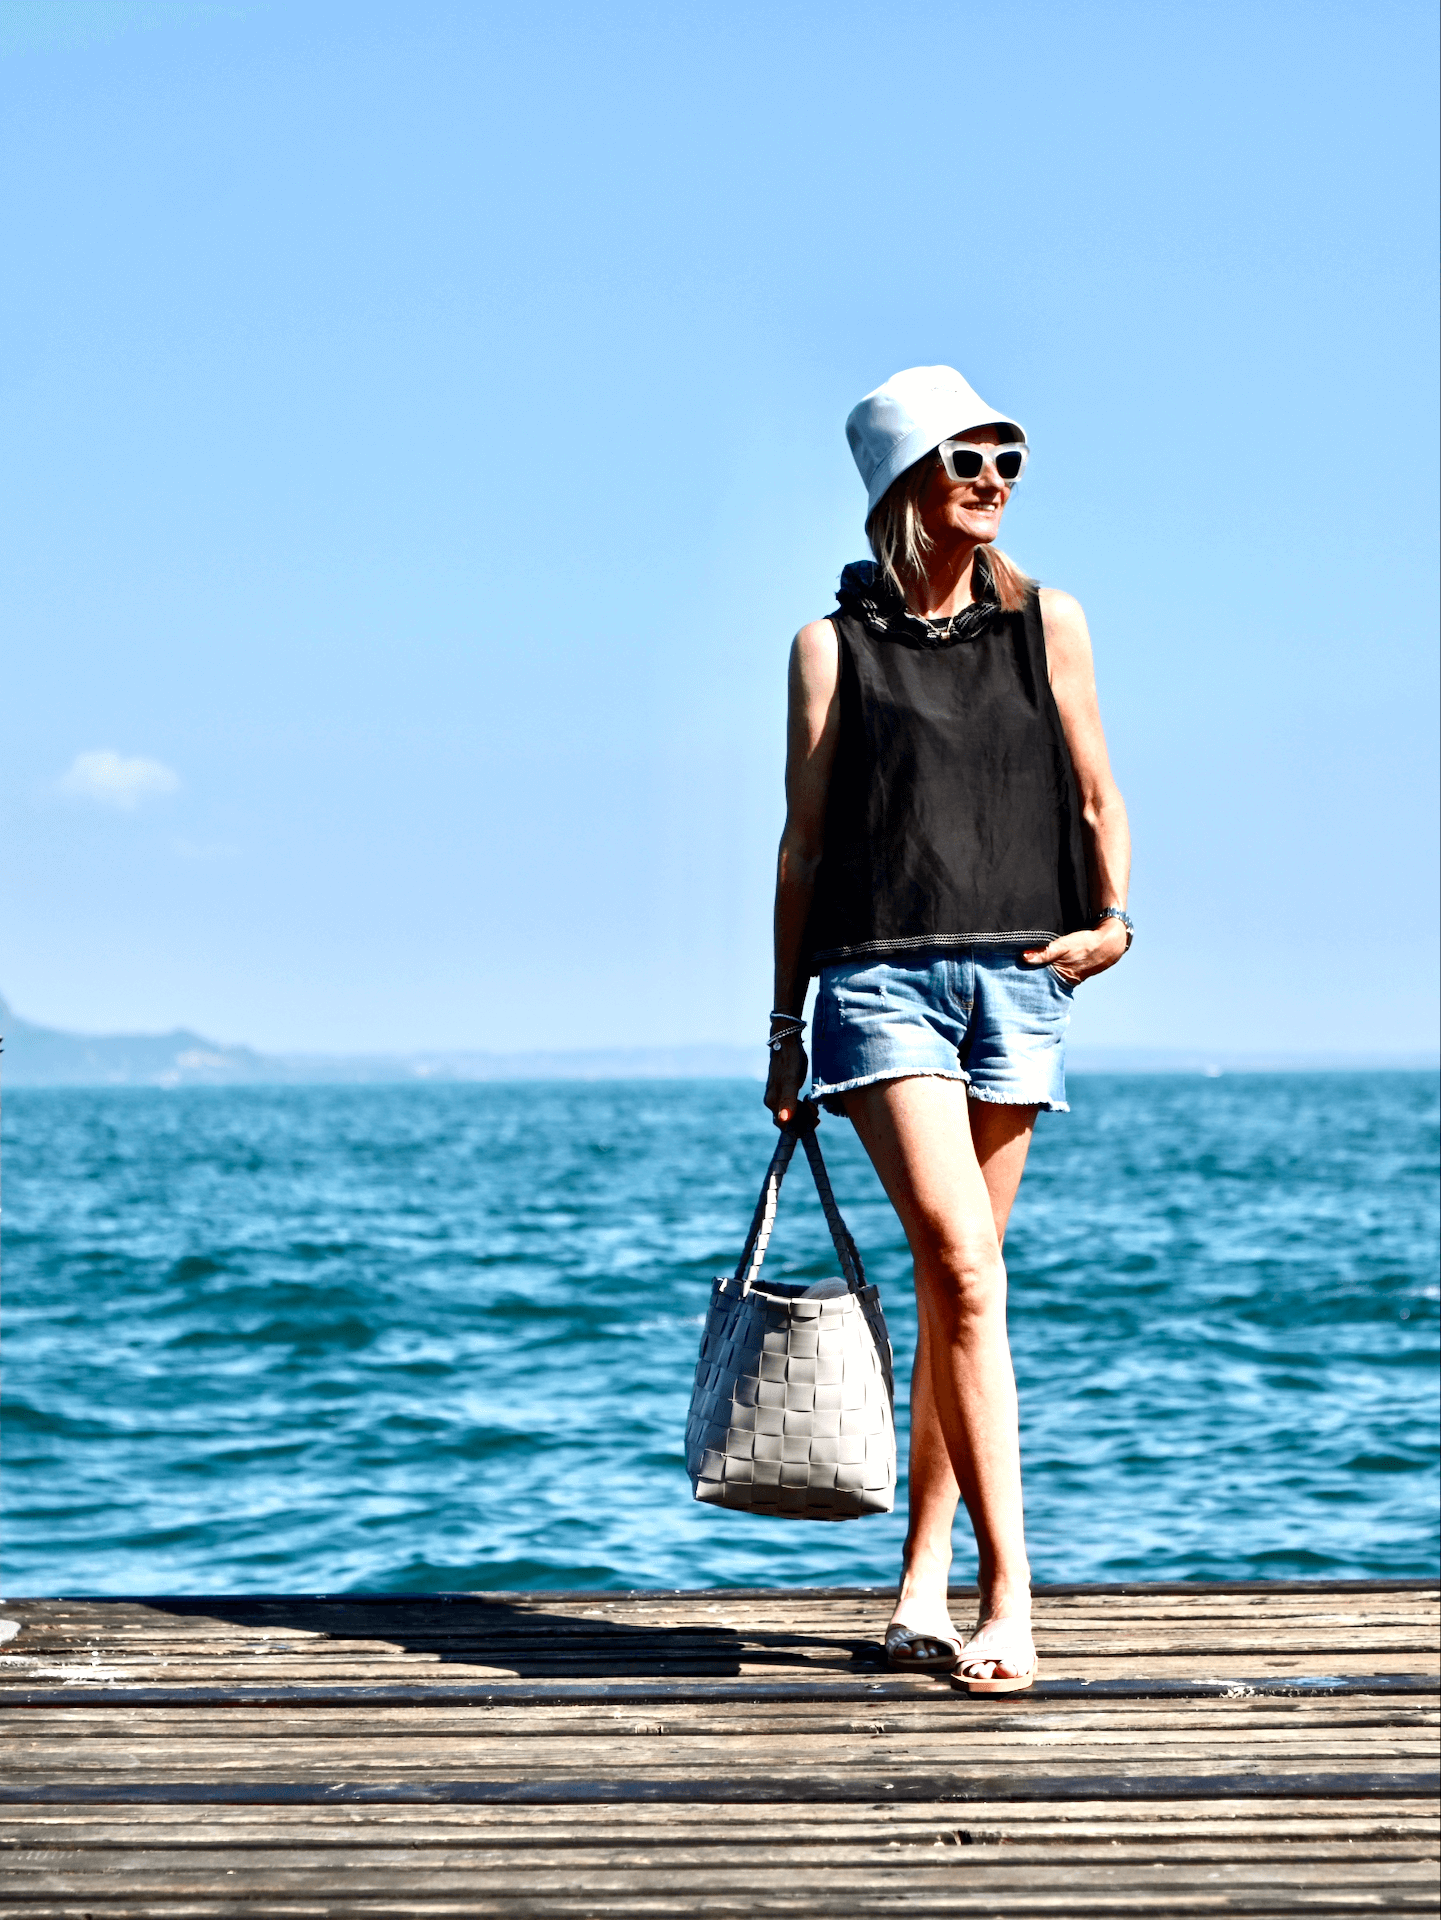 My Favourite 10 Summer Shorts Outfits